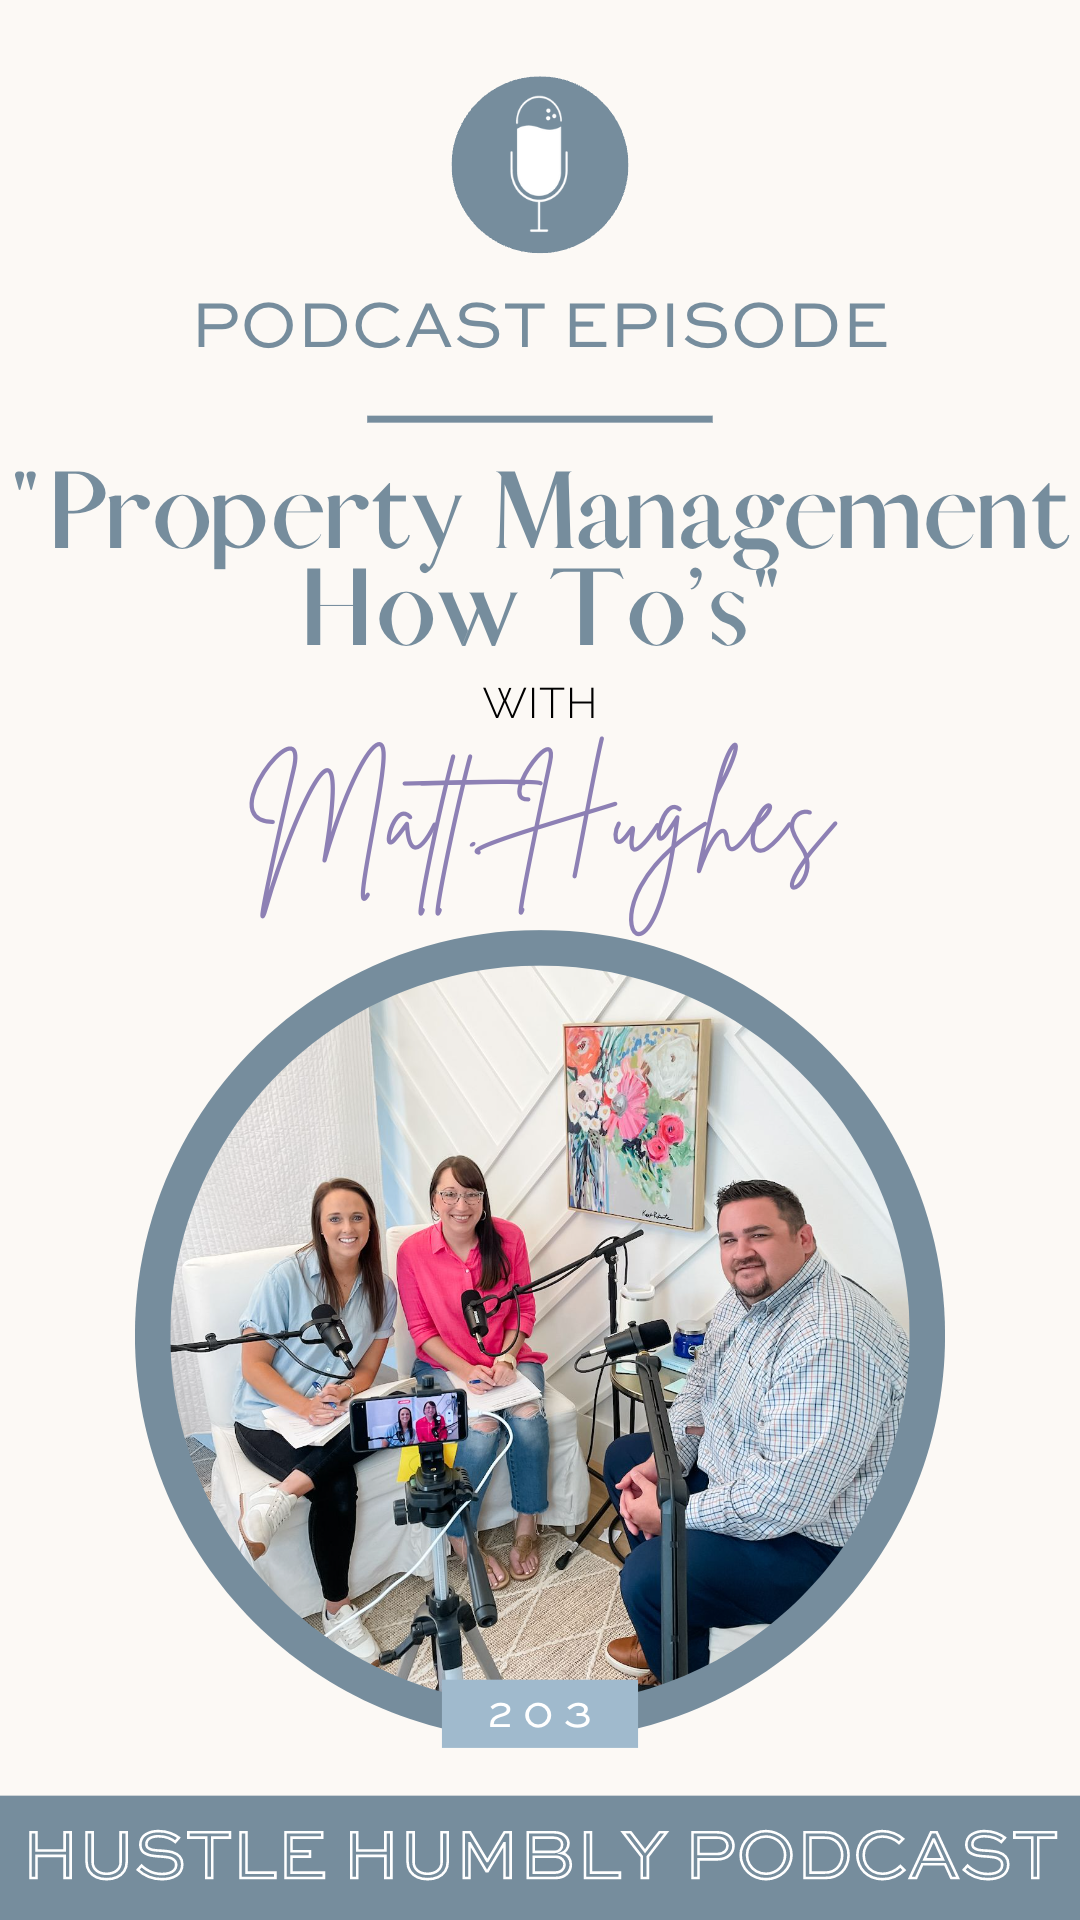 Hustle Humbly Episode 203: Property Management How To’s with Matt Hughes